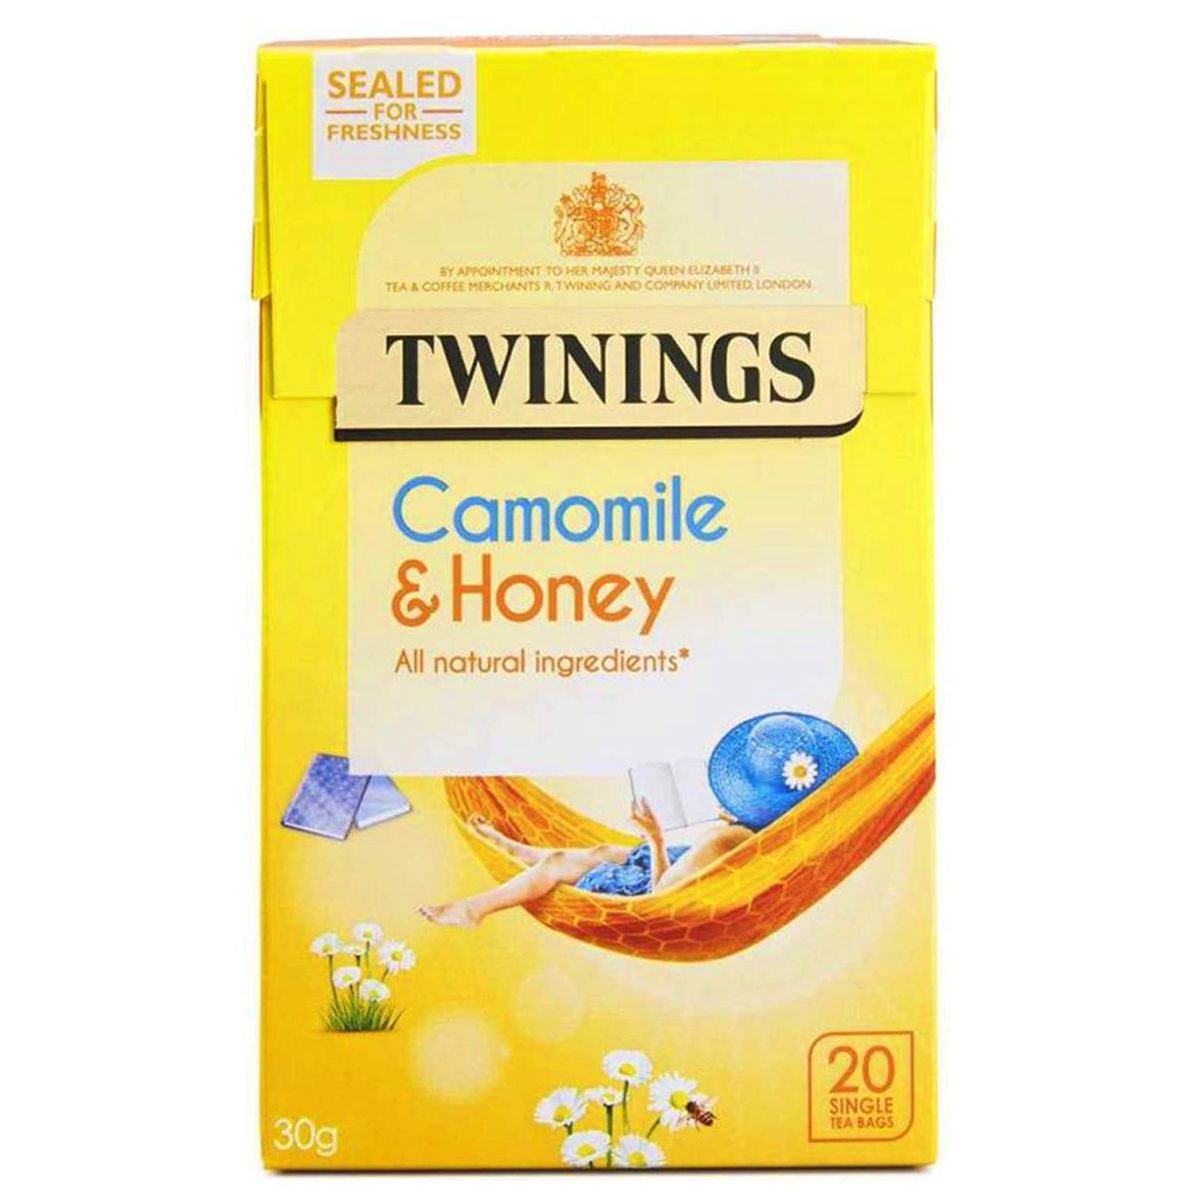 Twinings - Soothing Camomile & Honey 20 Teabags - 30g